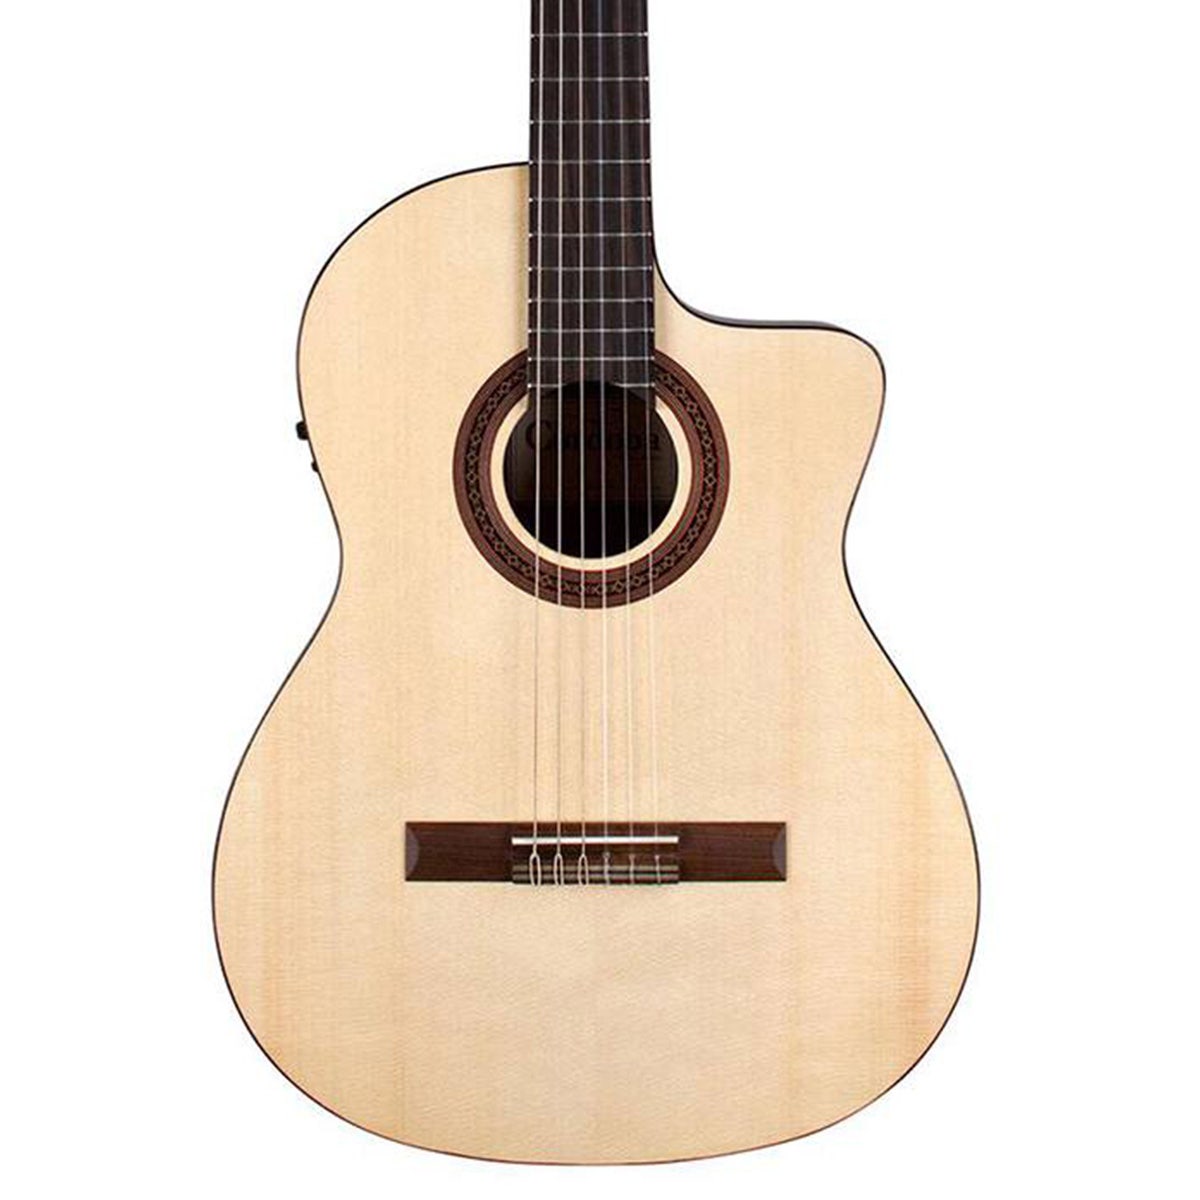 Cordoba C5-CE Spruce - Solid Engelmann Spruce Top, Mahogany Back & Sides with Pickup (C5CE), Mid Range Electric-Classical Guitar